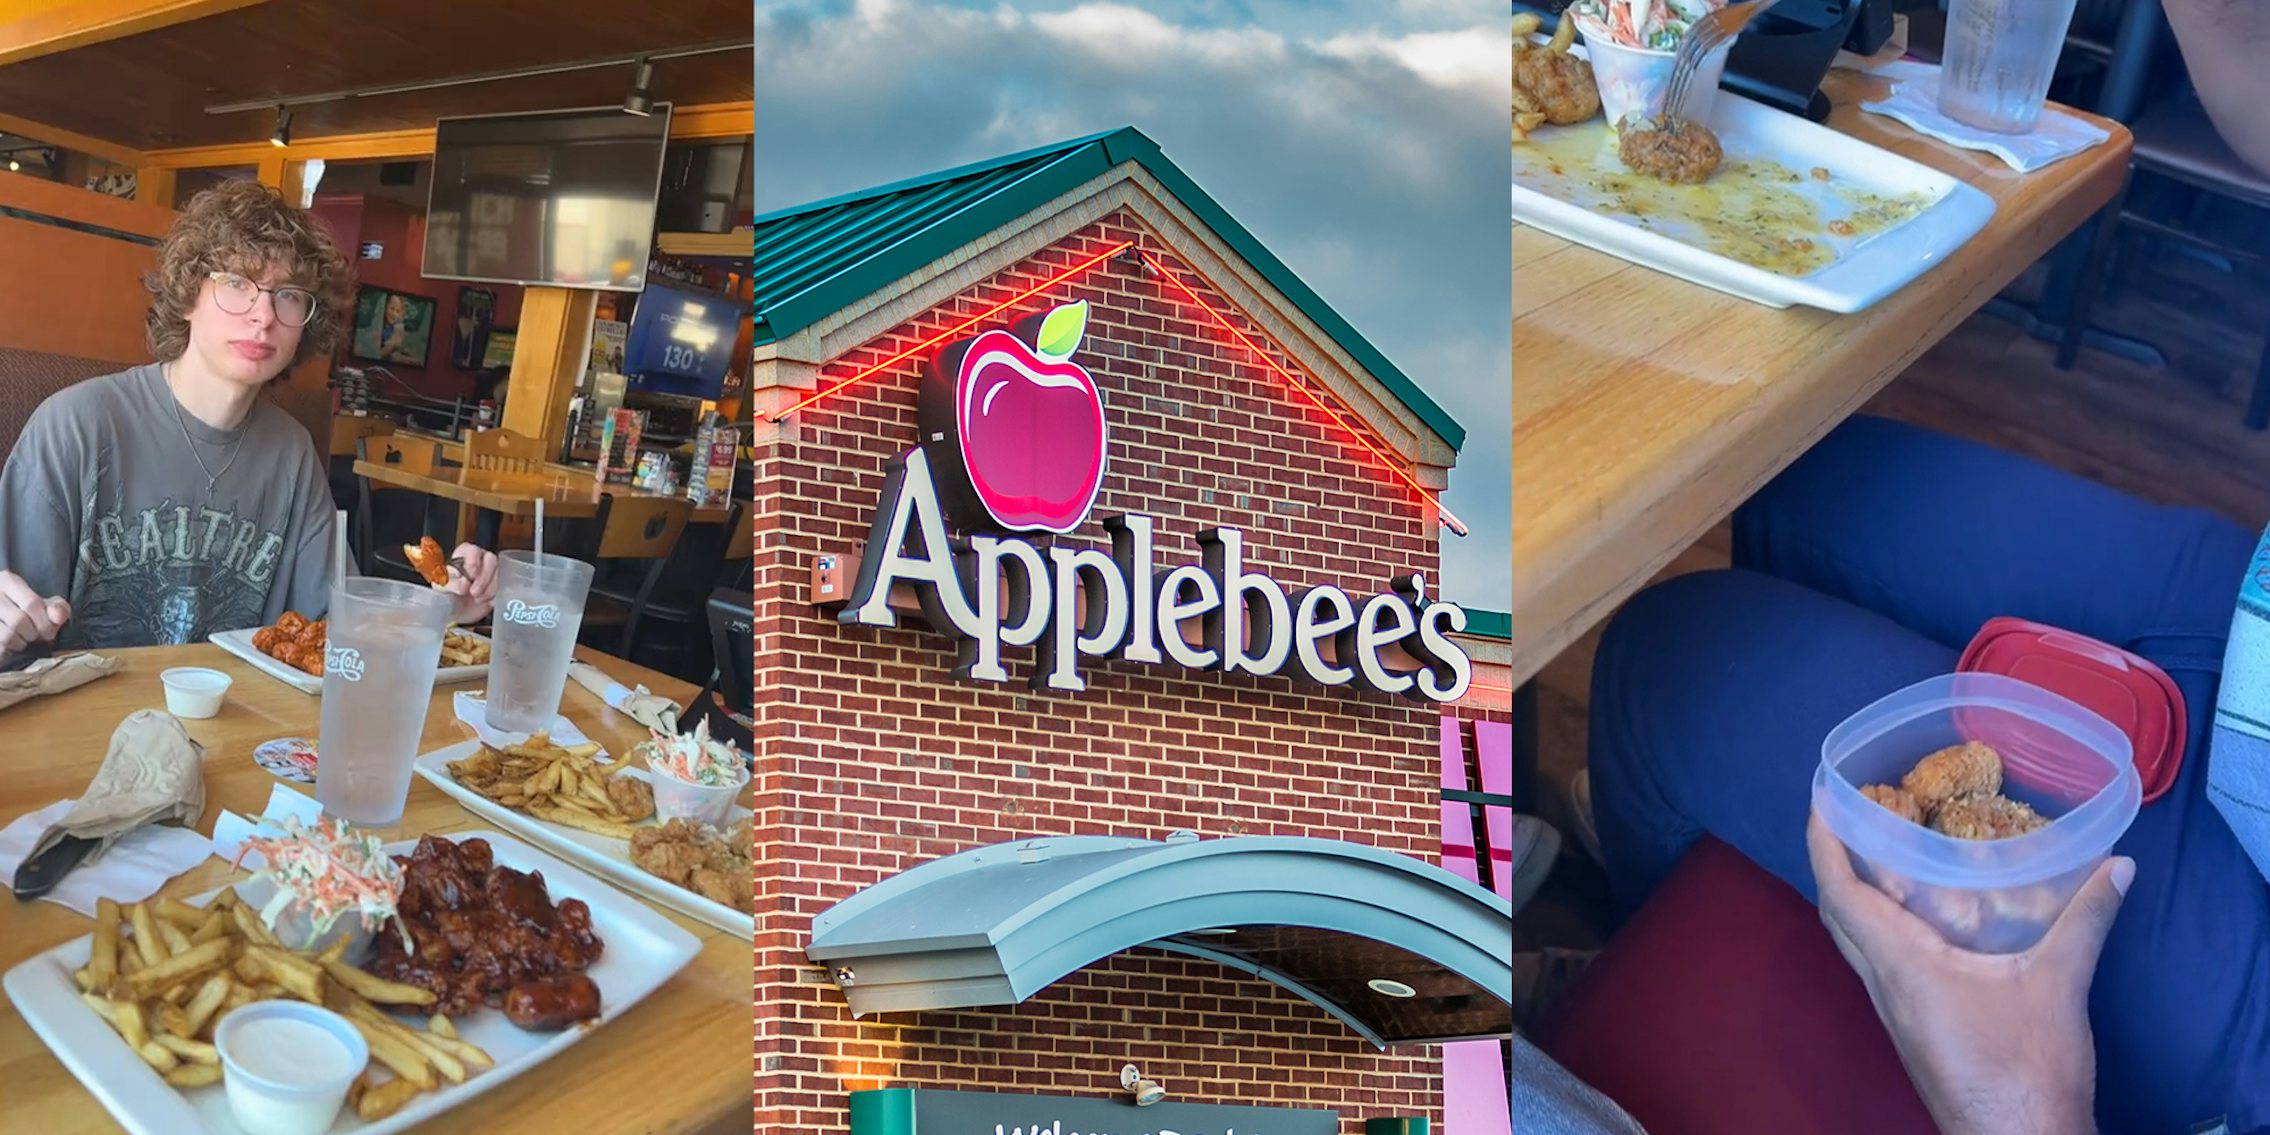 Applebee’s customers order unlimited wings, sneakily put them in Tupperware and Ziploc bag to take home